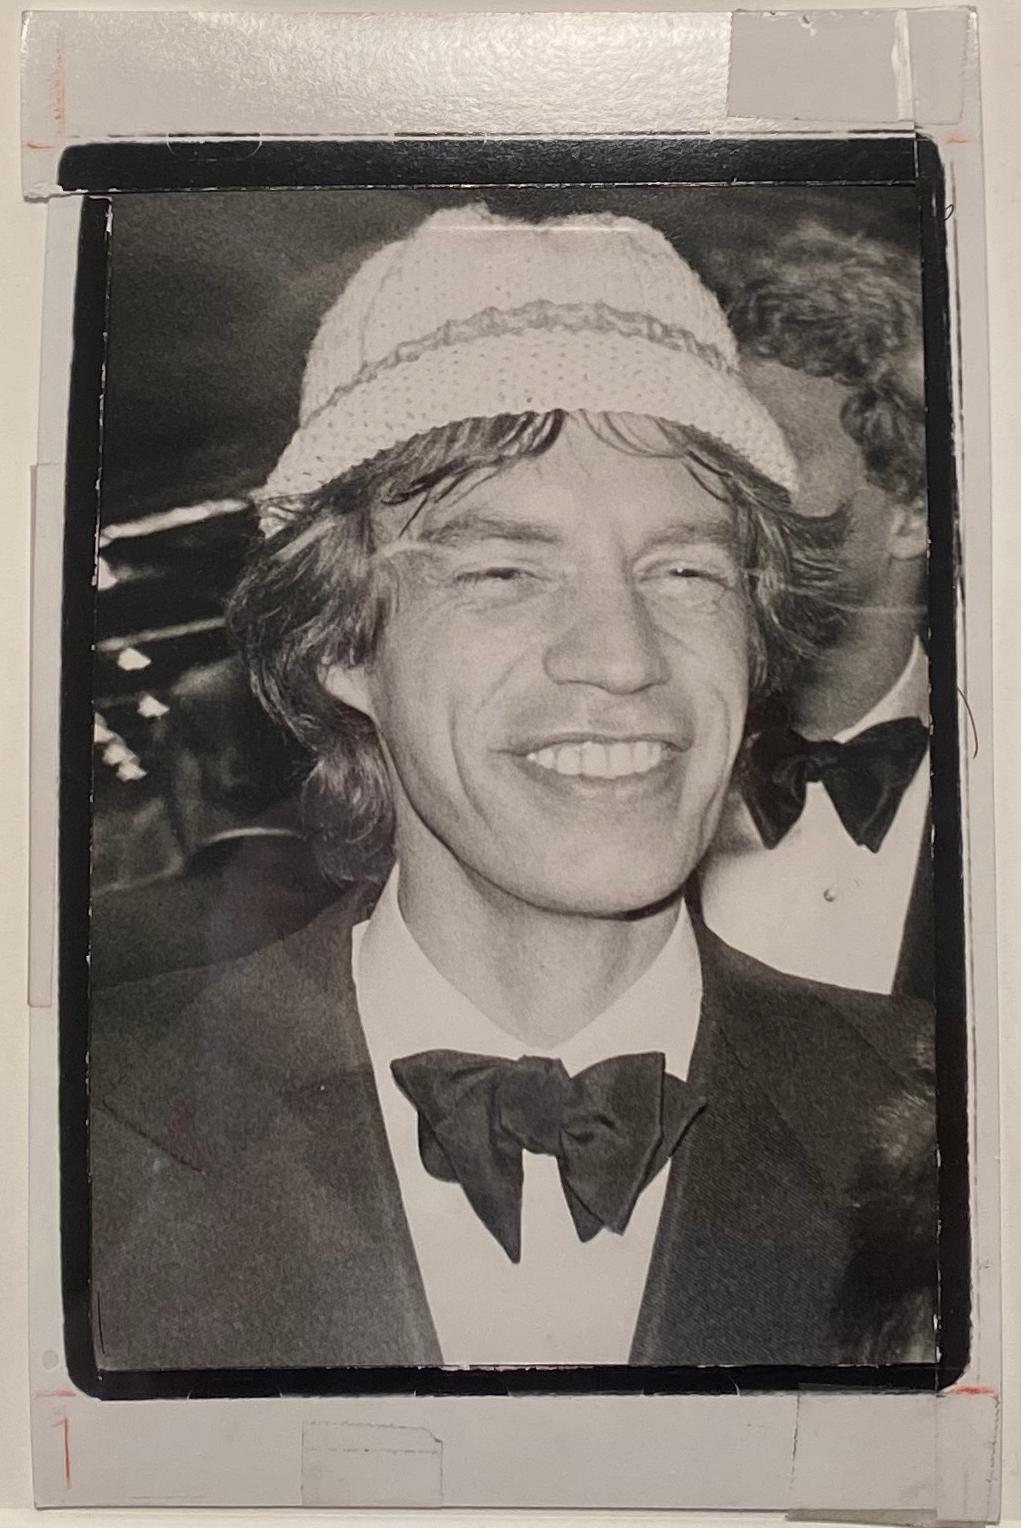 Mick Jagger in hat for Interview Magazine - Photograph by Andy Warhol